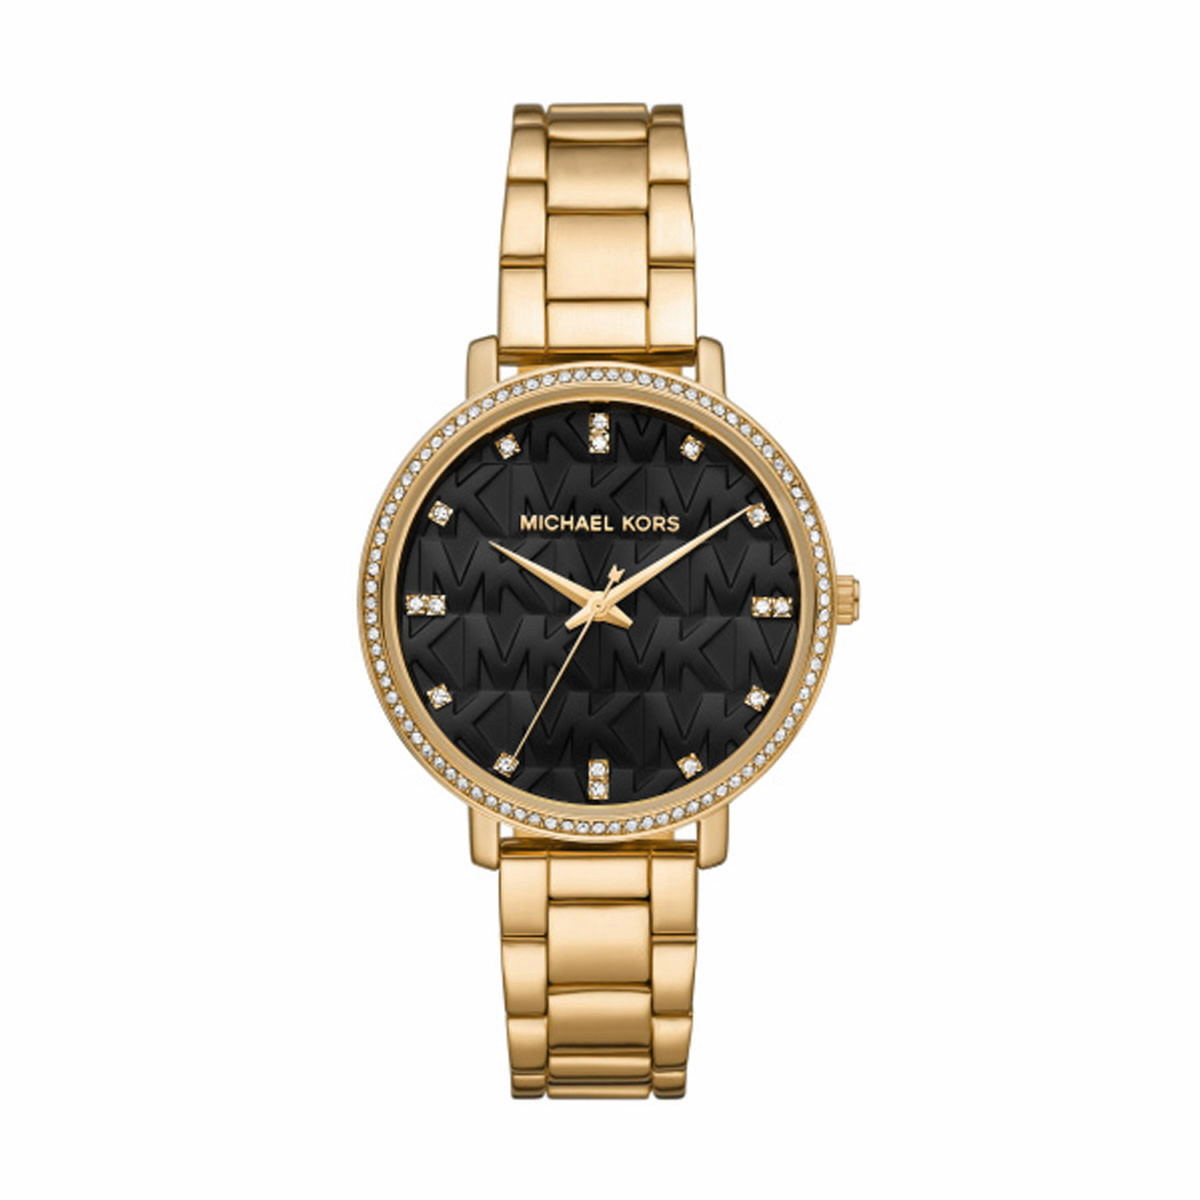 GOLD PYPER WATCH WITH INLAYS AND LOGO